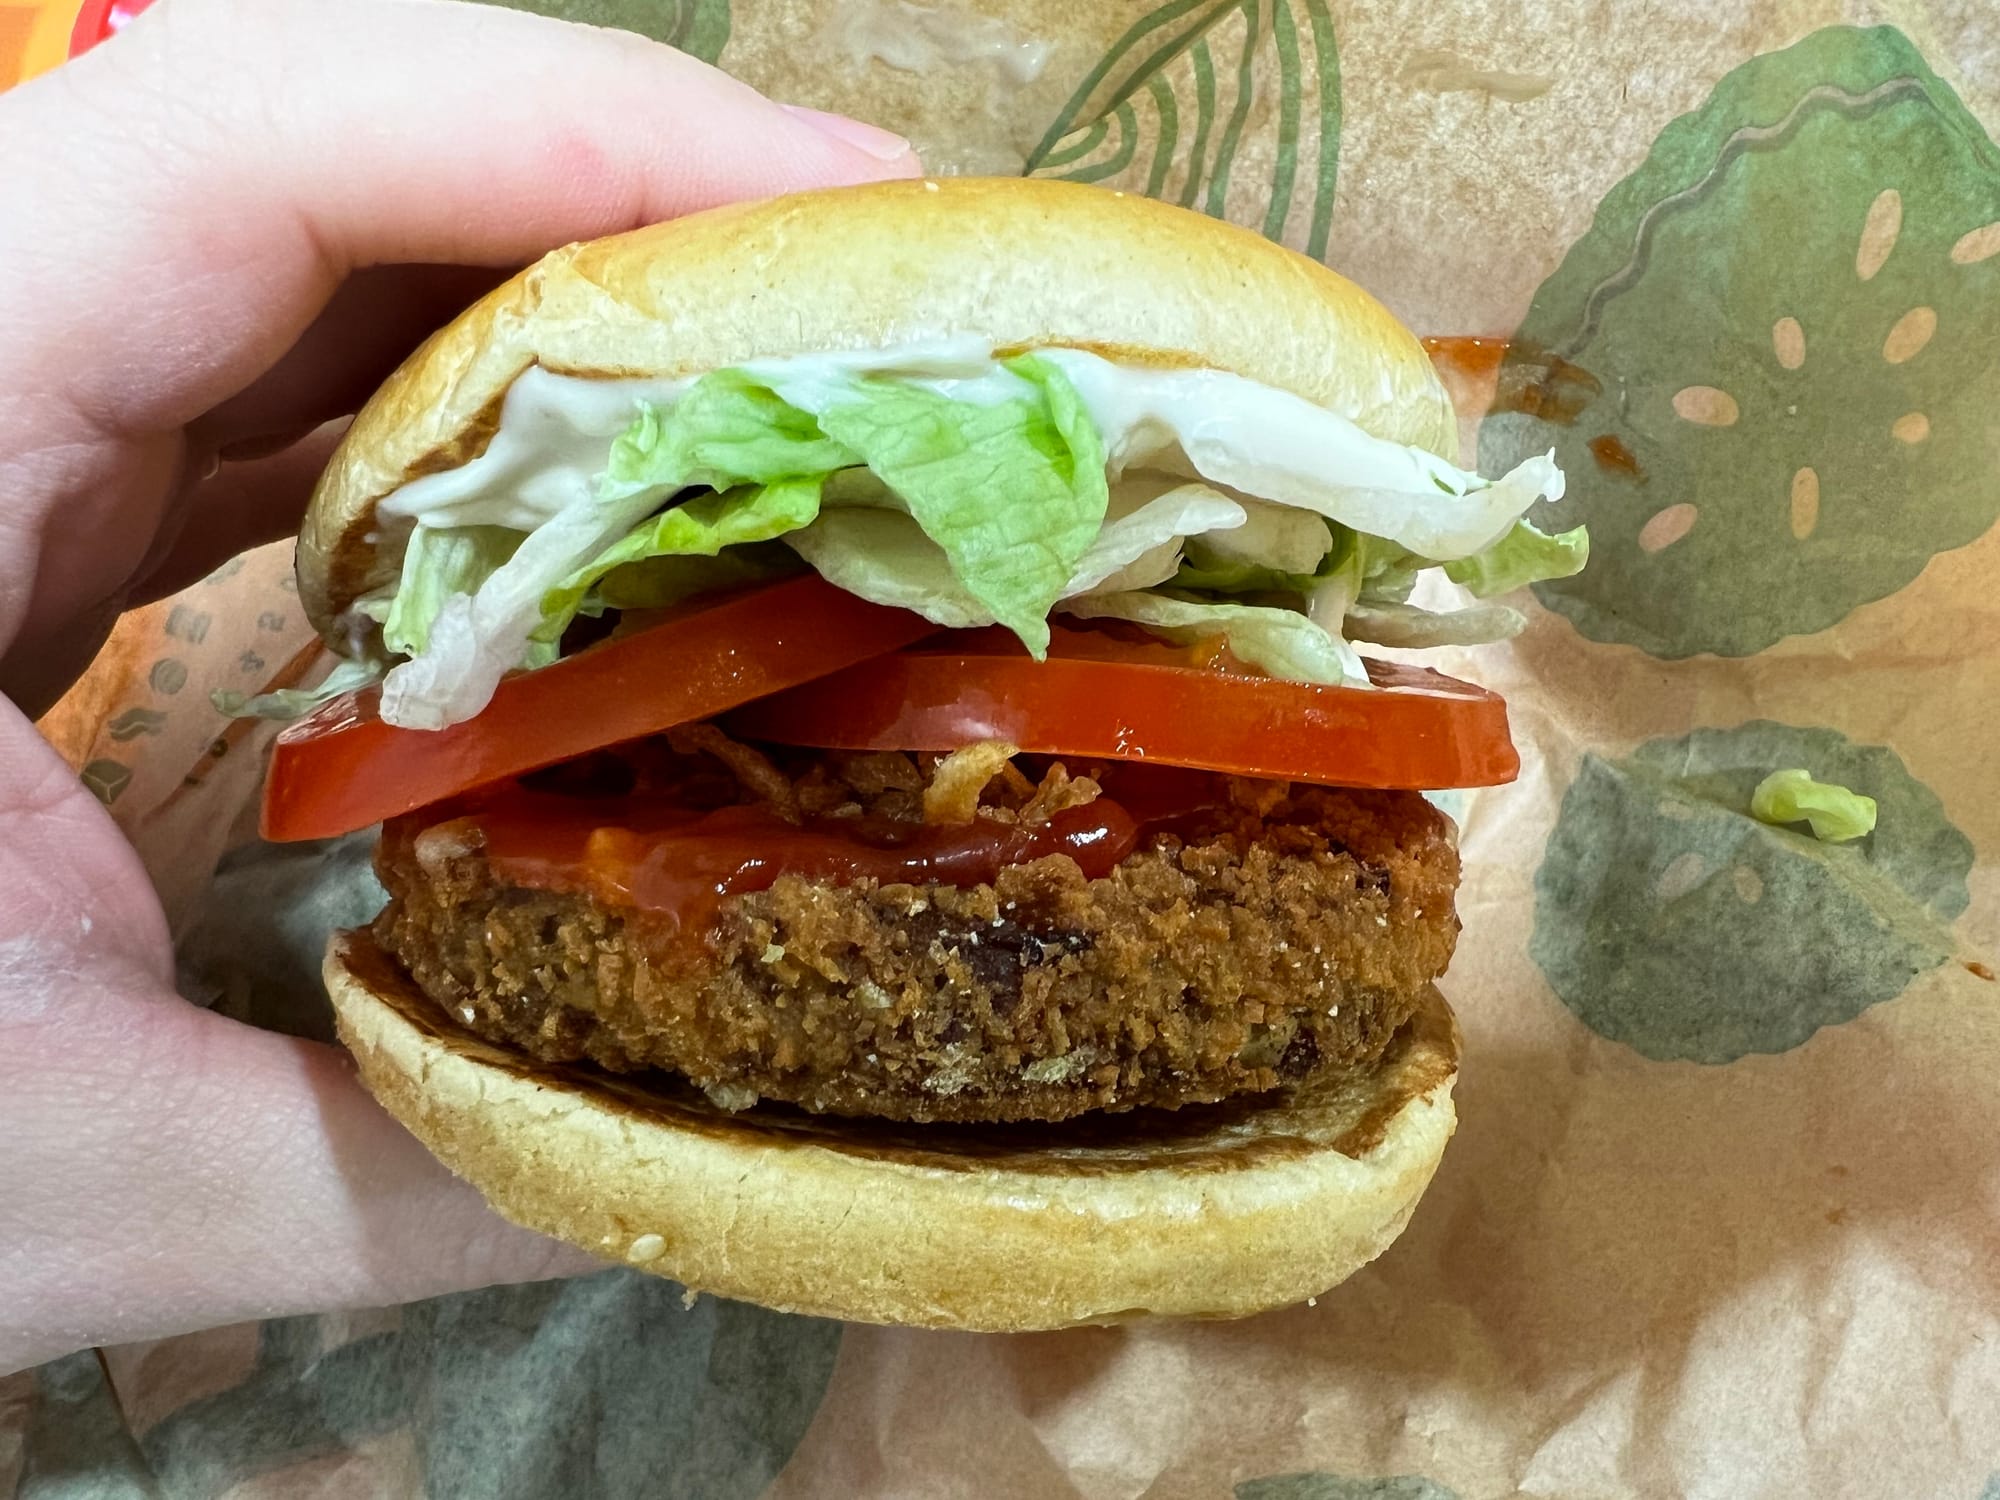 The Burger King Ultimate Bean Burger, seen from the side.